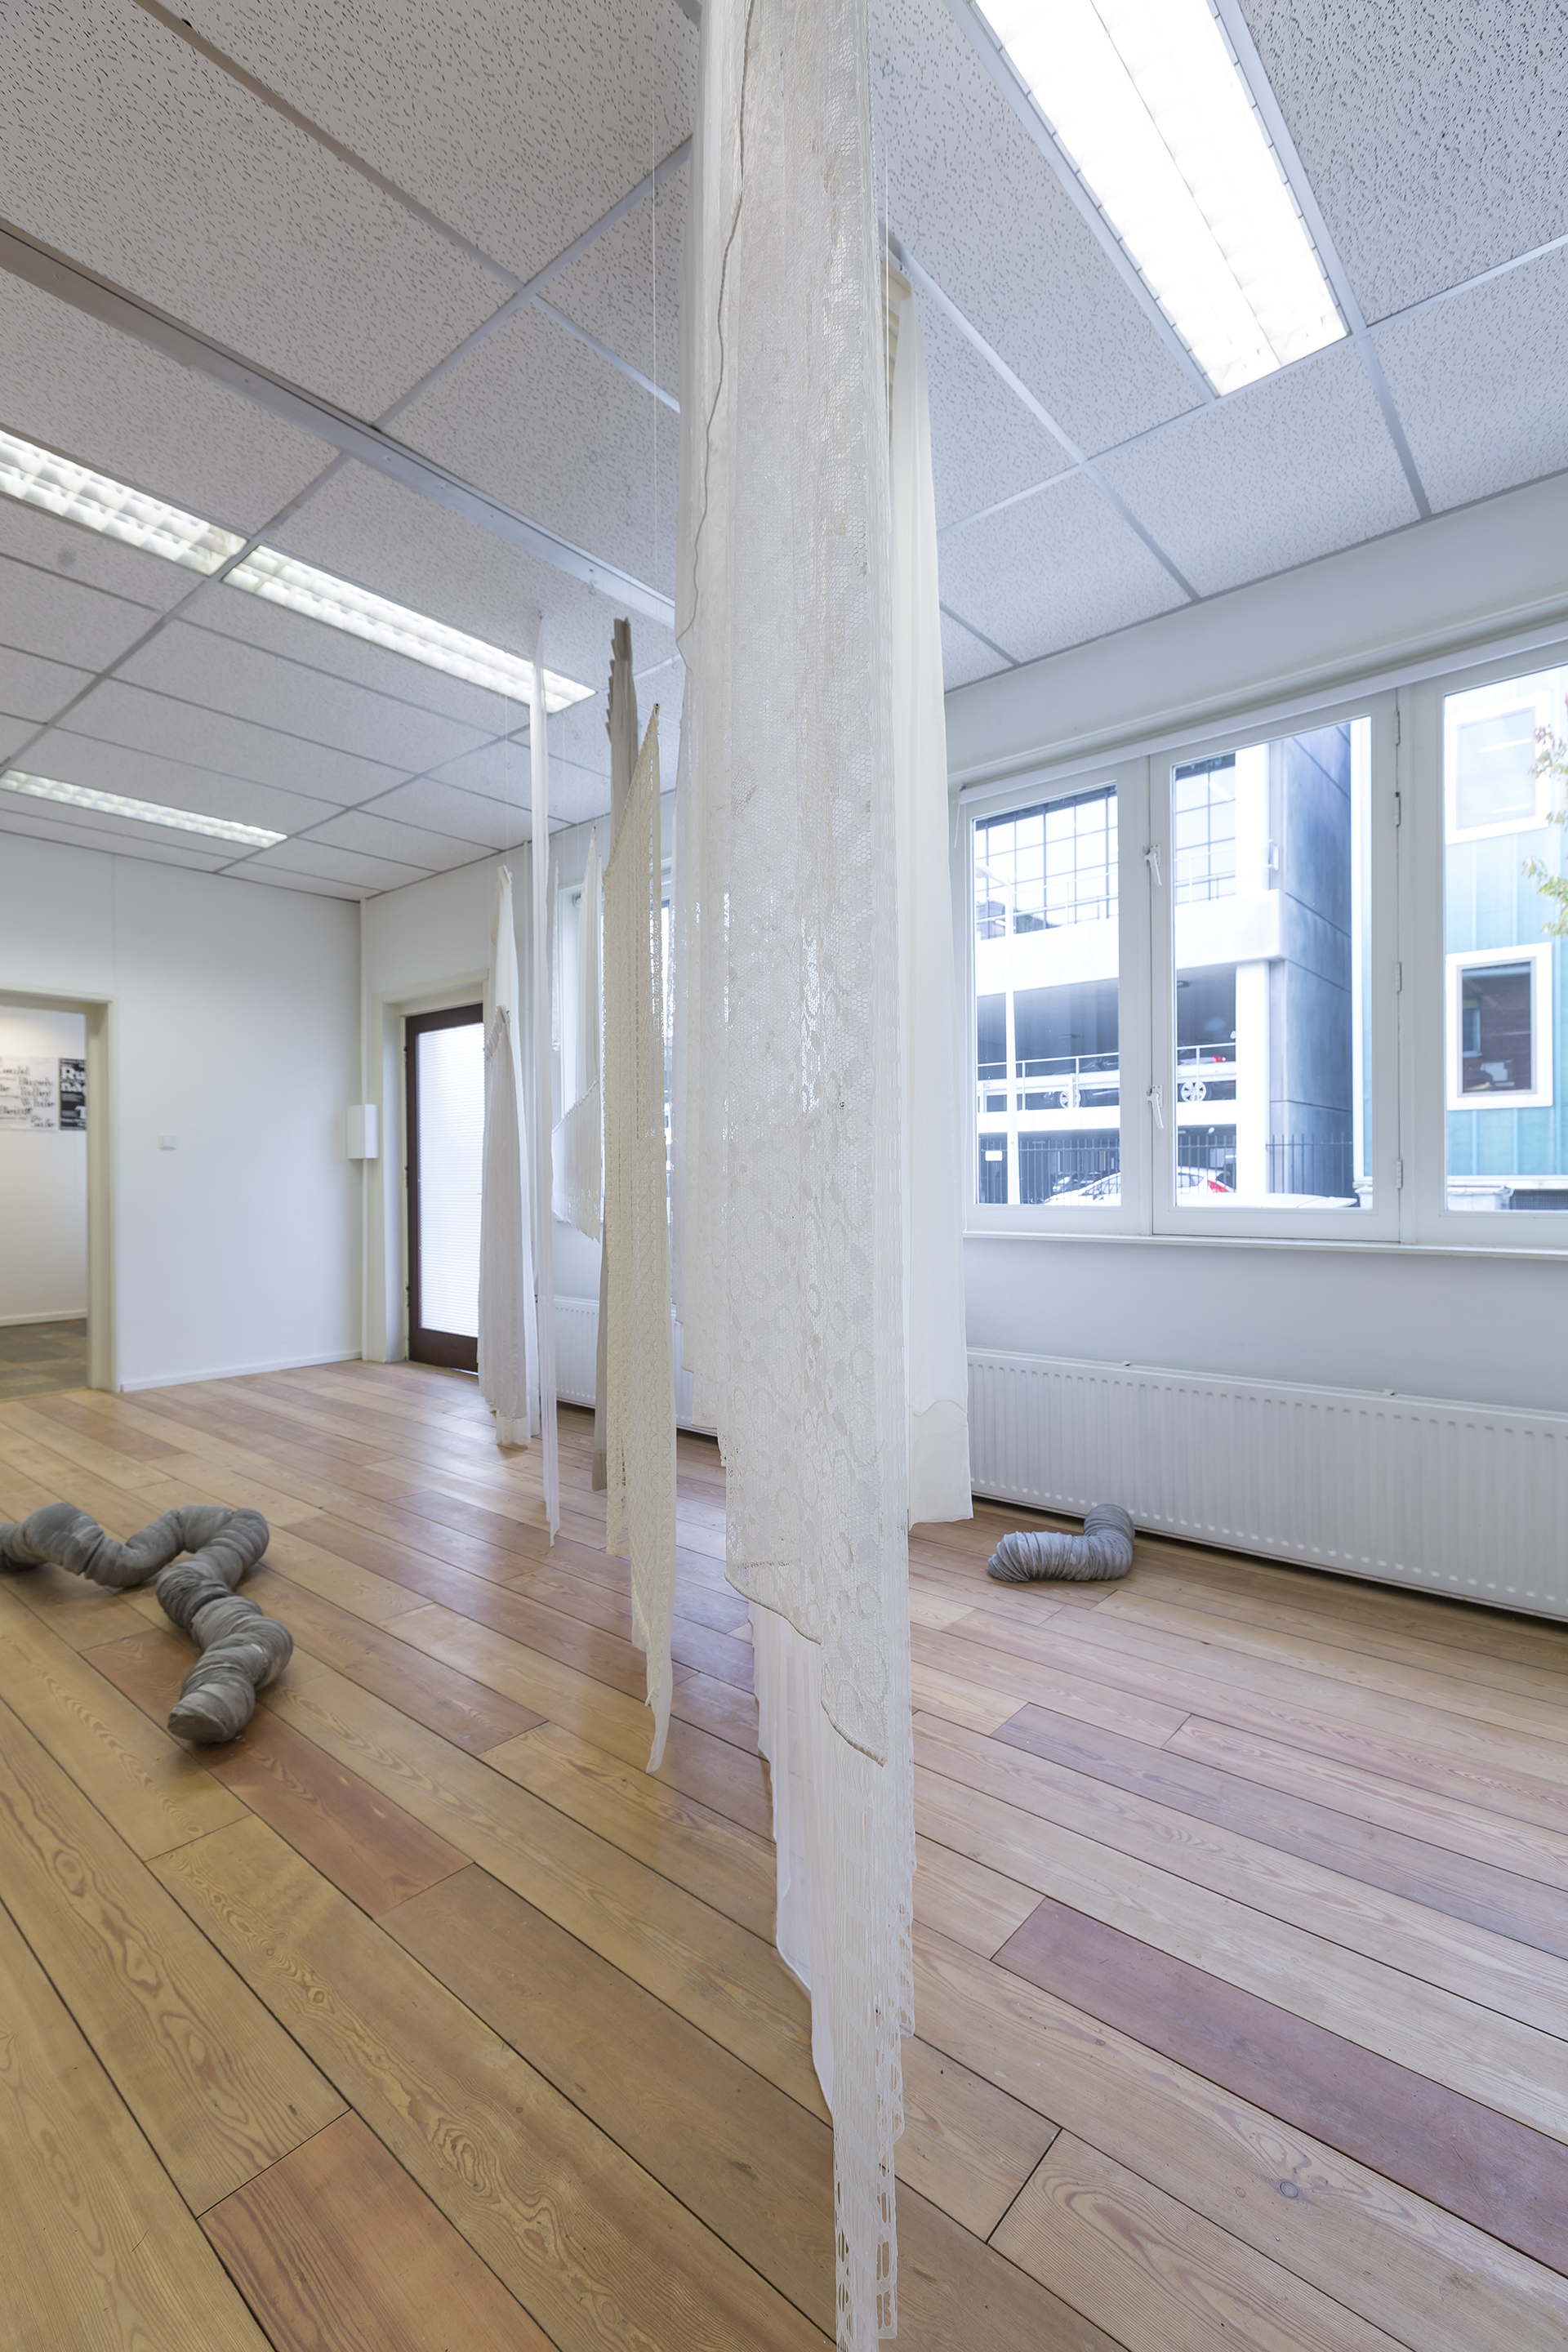 Overview. Straigh: C Markus 'Partition #2'. Right & left: S Bjarland 'Untitled (crawl)'